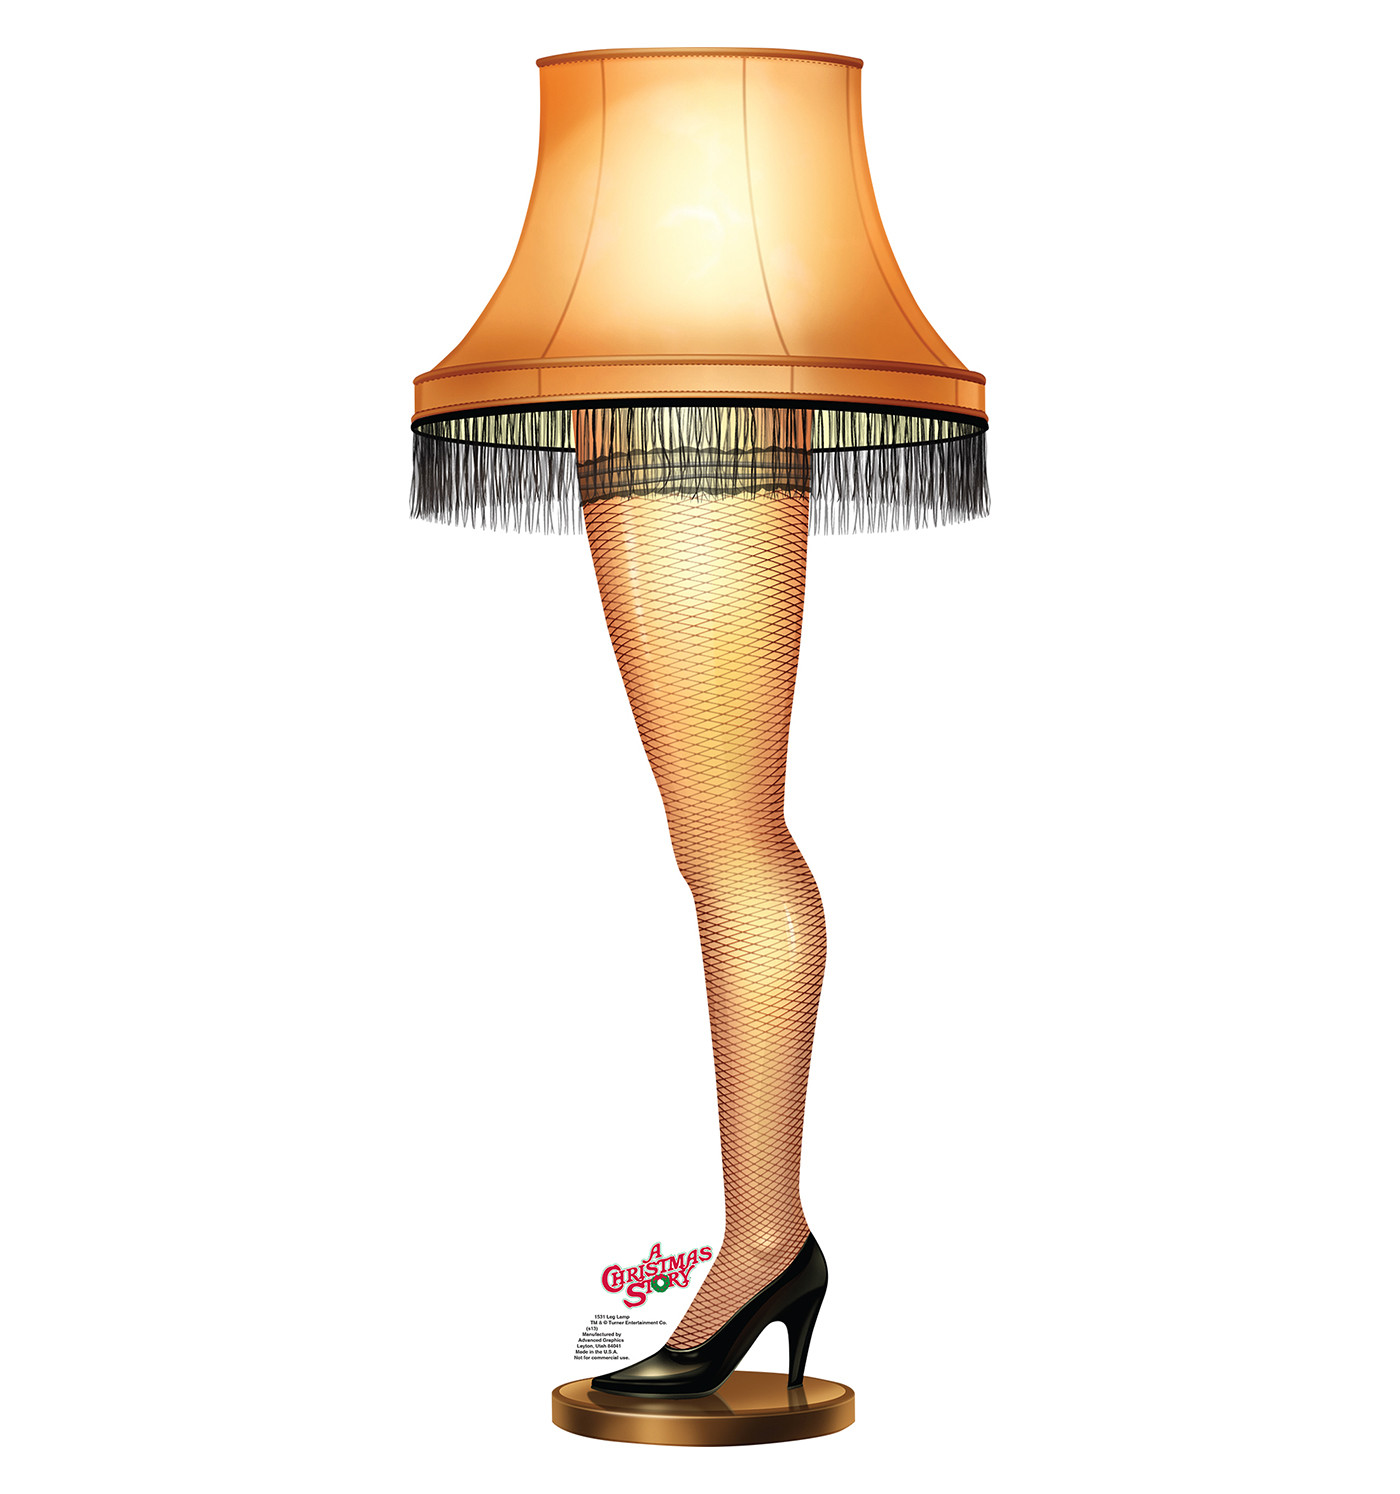 Christmas Leg Lamp Full Size
 Lamp clipart a christmas story Pencil and in color lamp